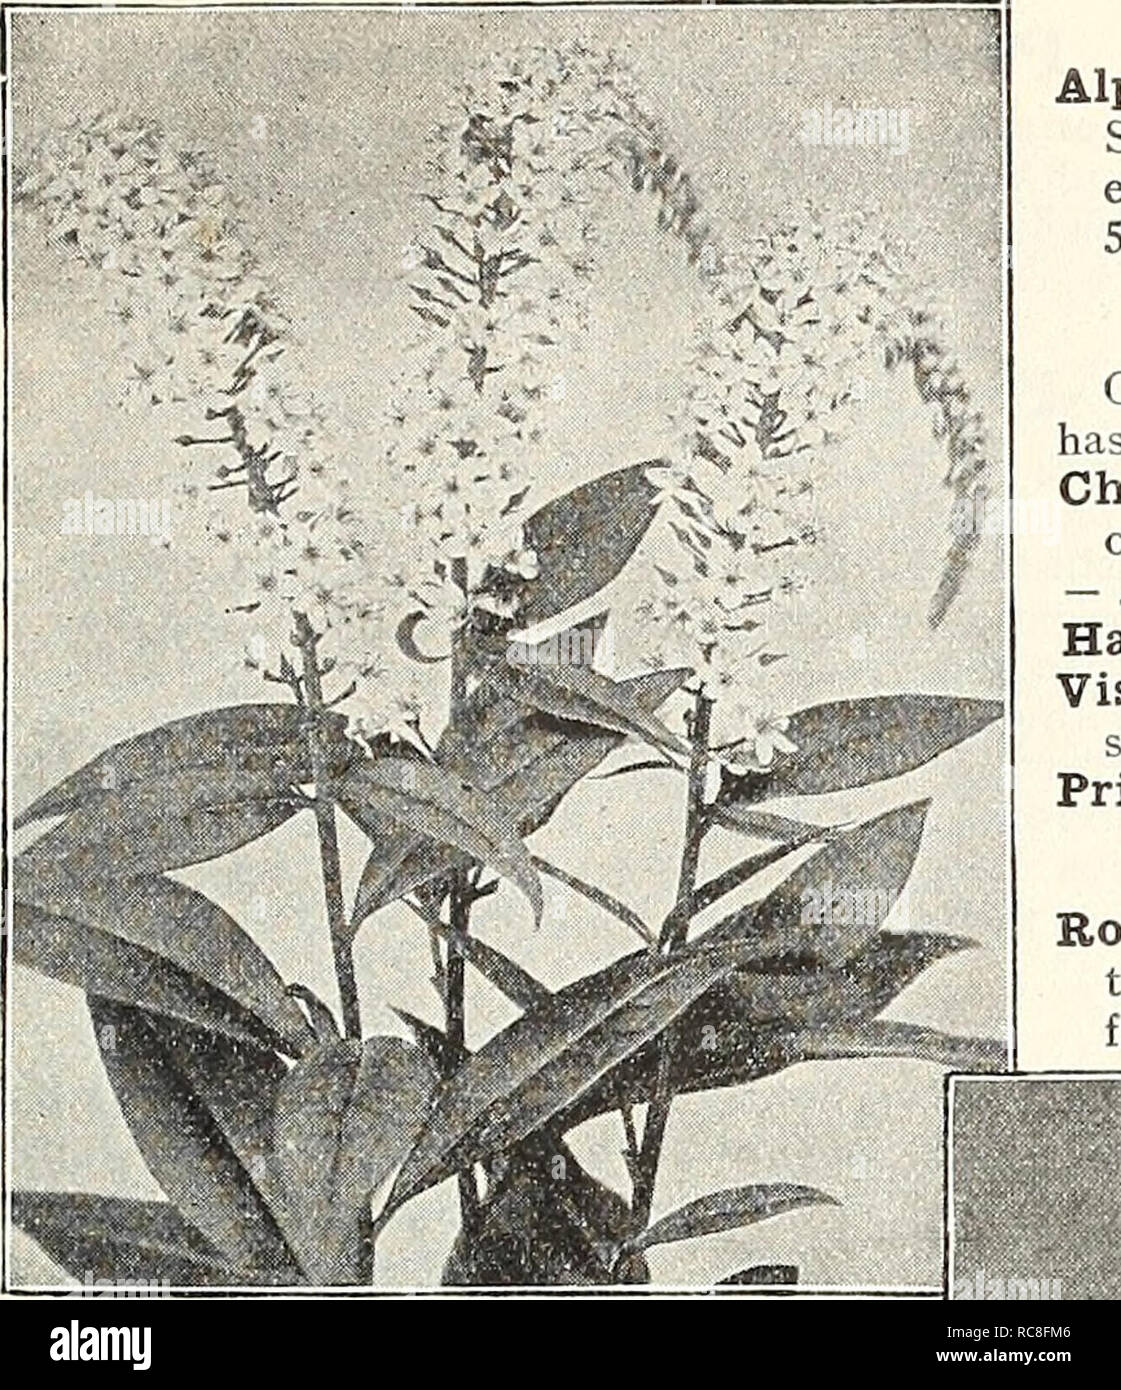 . Dreer's garden book 1930. Seeds Catalogs; Nursery stock Catalogs; Gardening Equipment and supplies Catalogs; Flowers Seeds Catalogs; Vegetables Seeds Catalogs; Fruit Seeds Catalogs. /»yAJTO HARDY PERENNIAL PIANTS «m 187. Lysimachia Clethroides Lysimachia Clethroides {Goose-neck, Loose-strife)' A fine hardy variety about 2 feet high&gt; long, dense, recurved spikes of pure white flowers from July to September. 35 cts. each; $3.50 per doz. Fortunei. A neat looking plant grow- ing 18 inches high with dense upright spikes of white flowers in August. The foliage turns to an attractive brilliant b Stock Photo